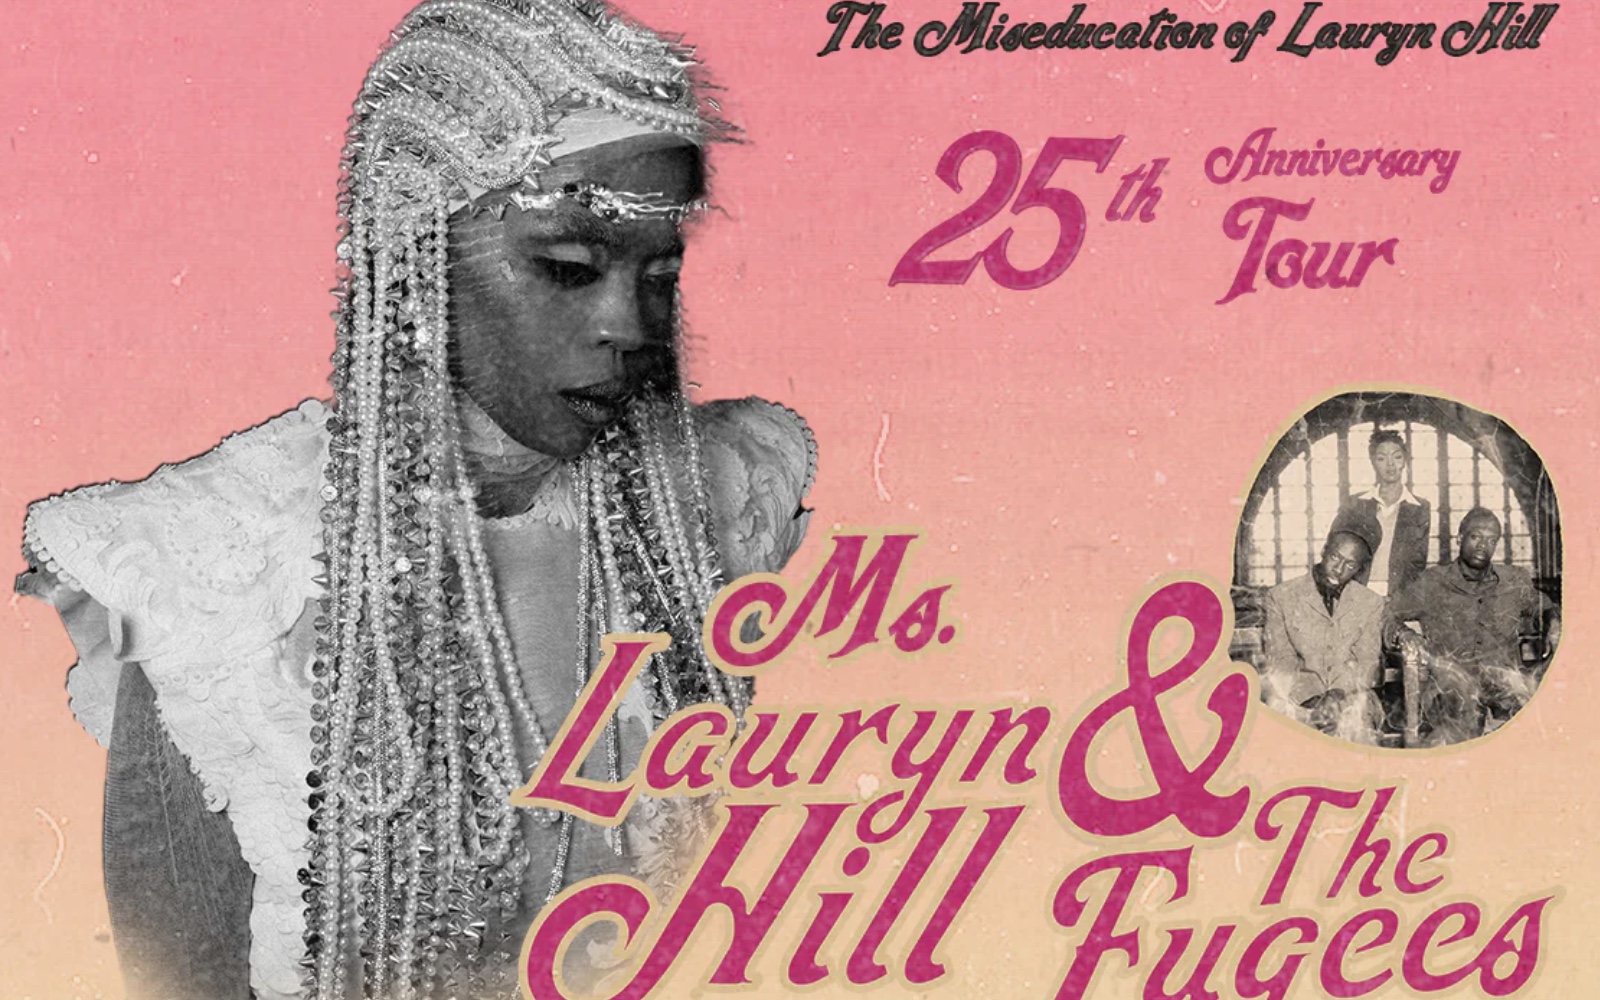 Lauryn Hill launches new tour commemorating  her album  “The Miseducation of Lauryn Hill”